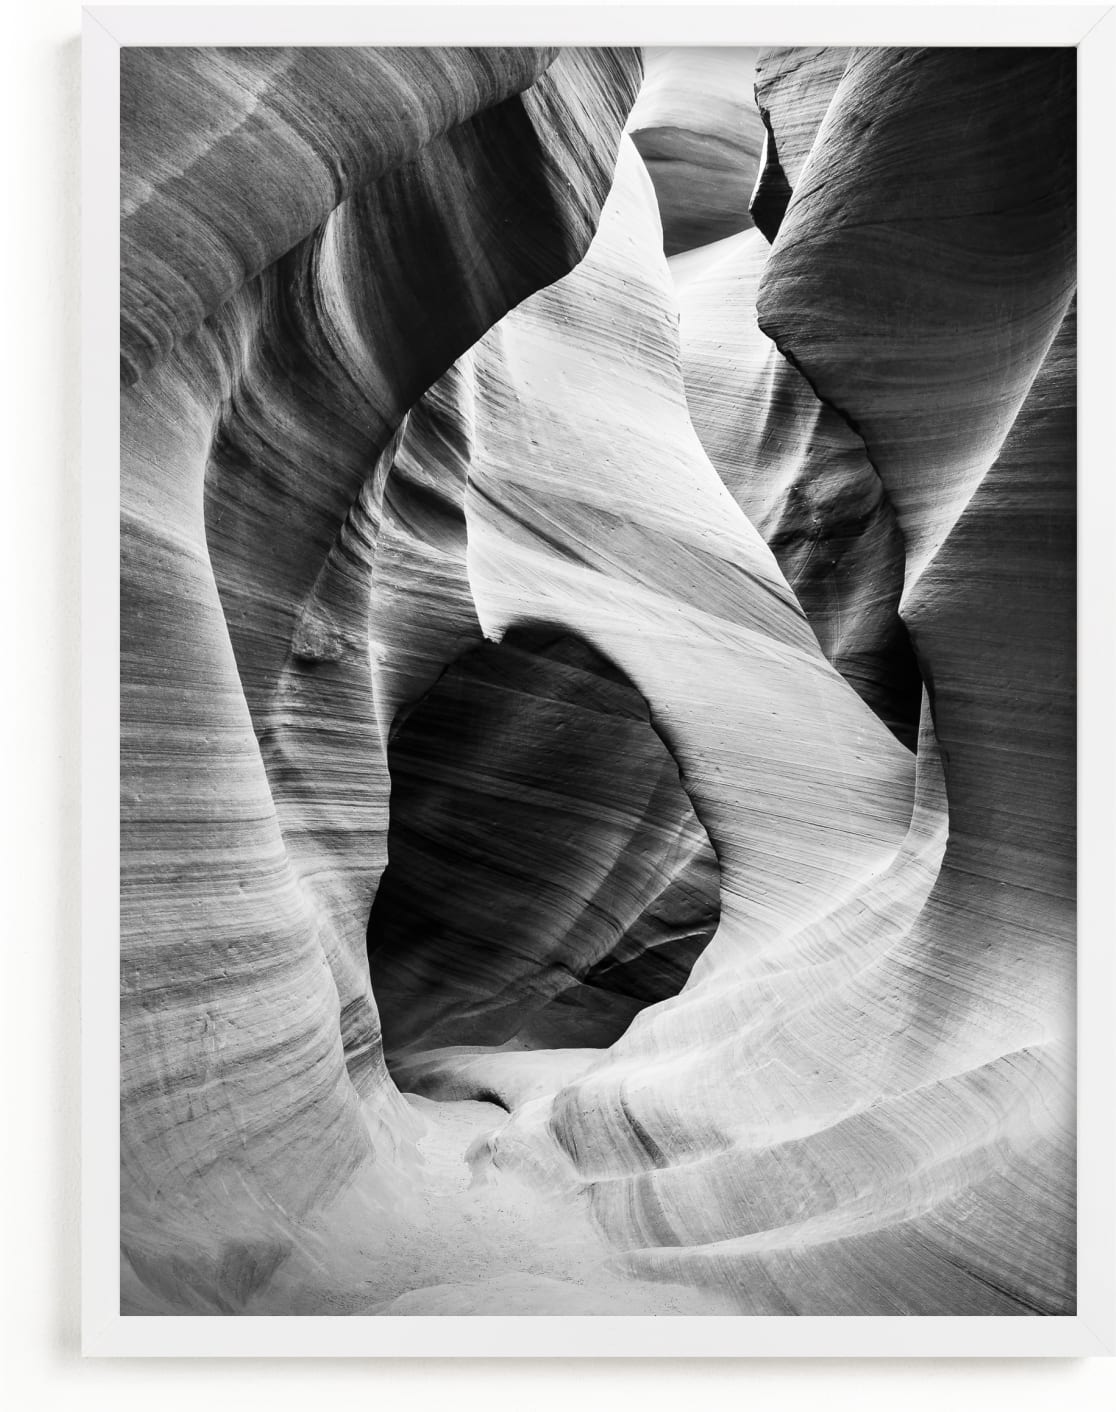 This is a black and white art by Kamala Nahas called Canyon 1.